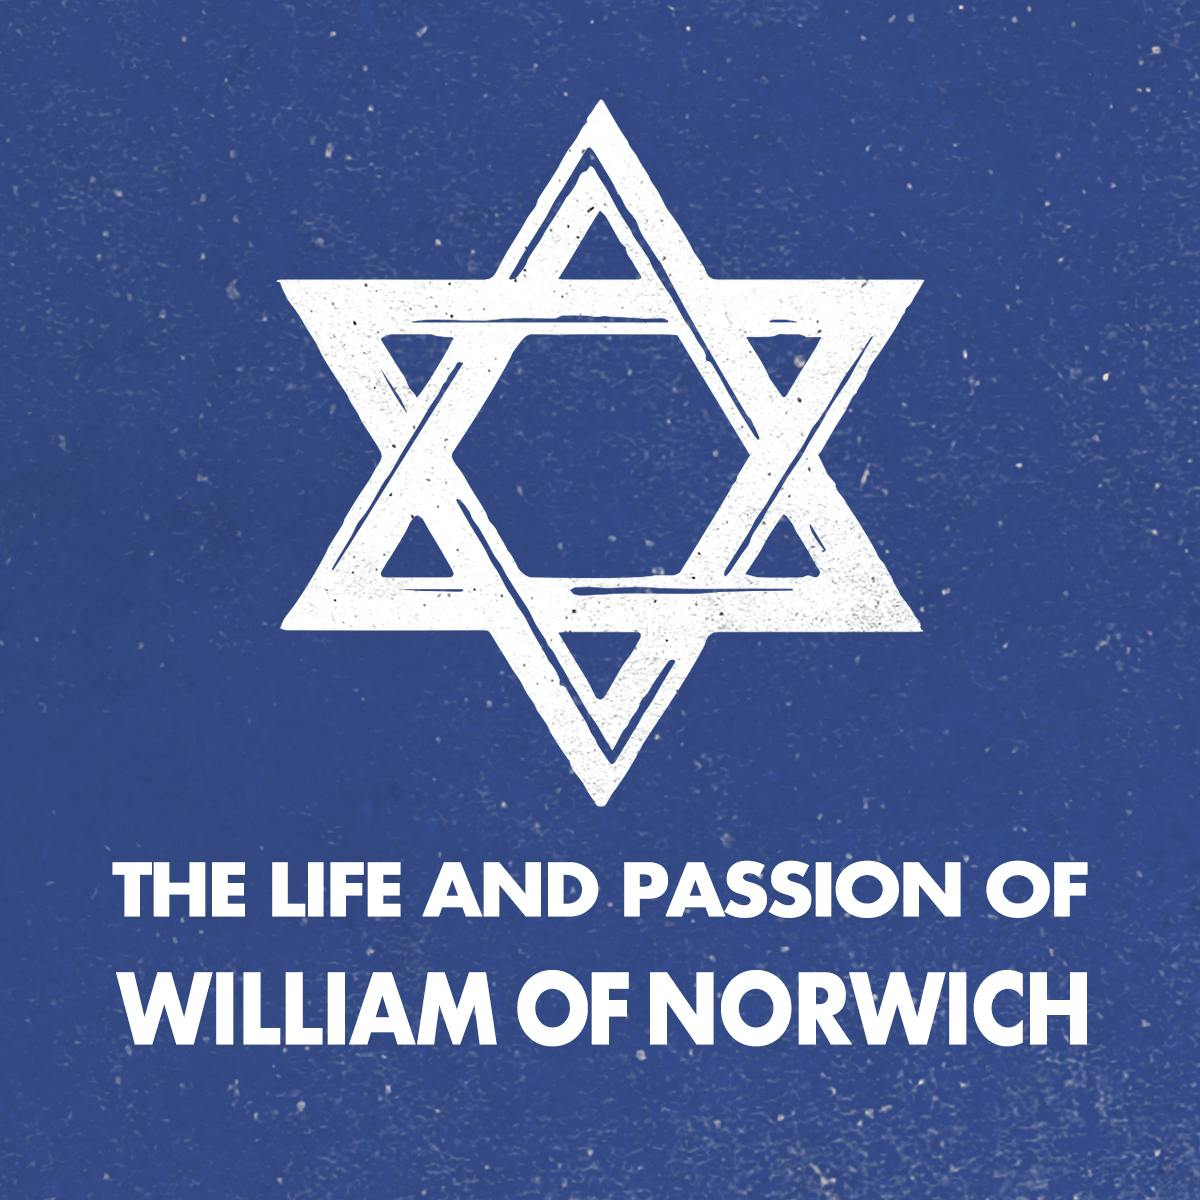 The Life and Passion of William of Norwich